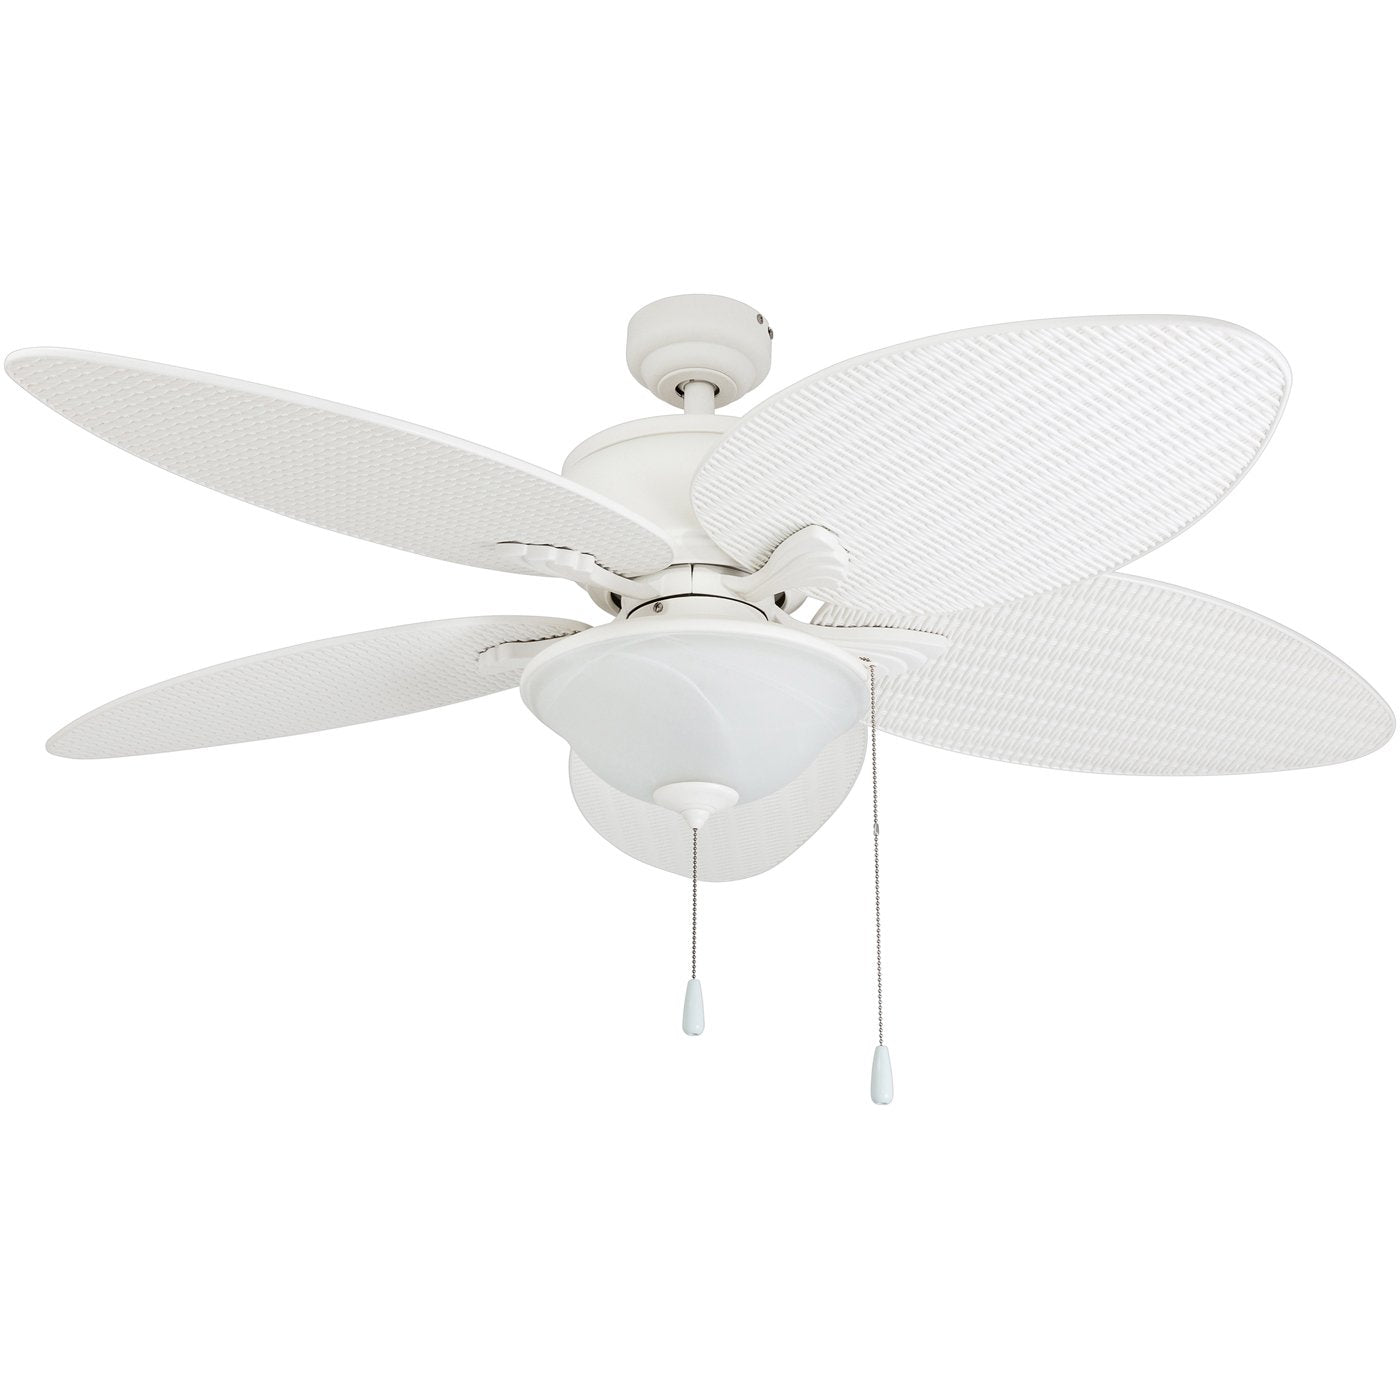 52 Inch Solana, White, Pull Chain, Indoor/Outdoor Ceiling Fan by Prominence Home